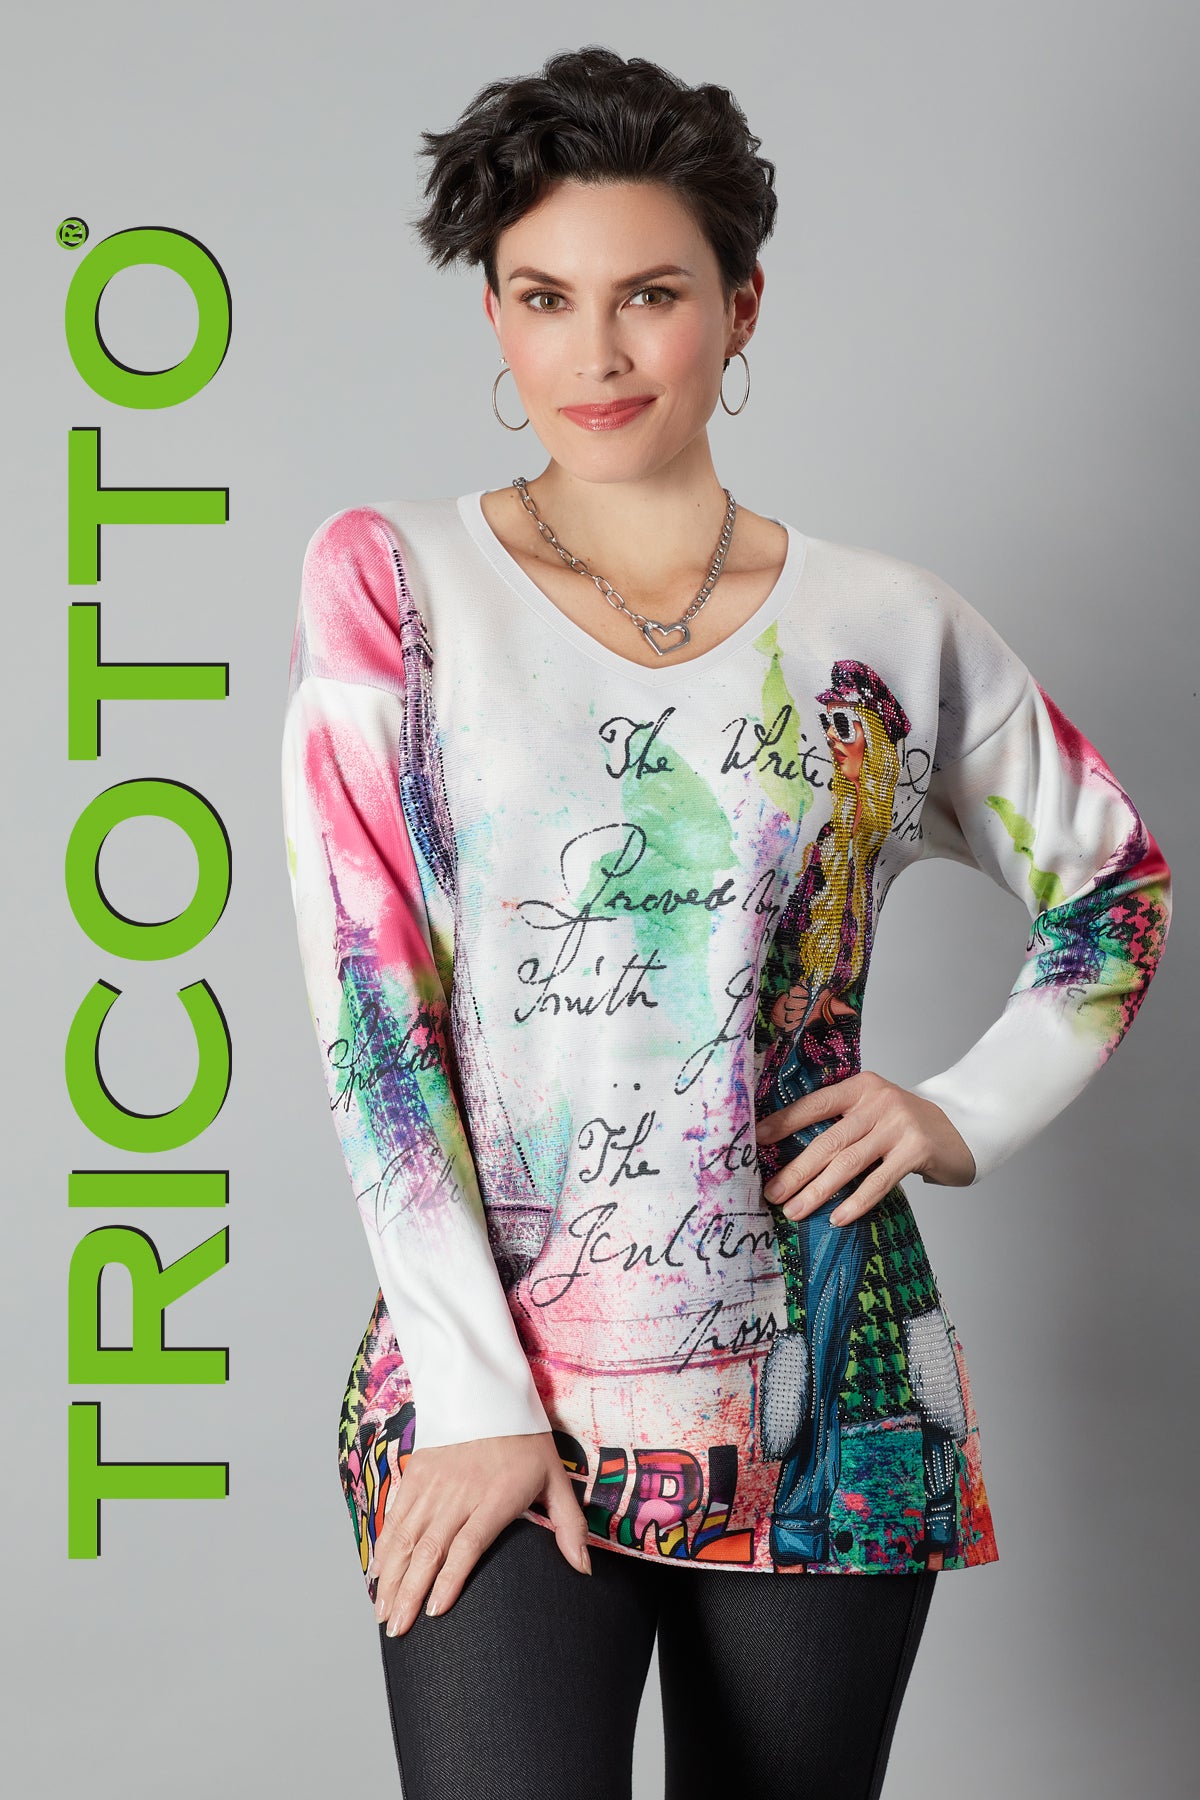 Tricotto Fashionista Sweater-Buy Tricotto Sweaters Online-Tricotto Online Sweater Shop-Tricotto Clothing Montreal-Tunic Sweaters Online